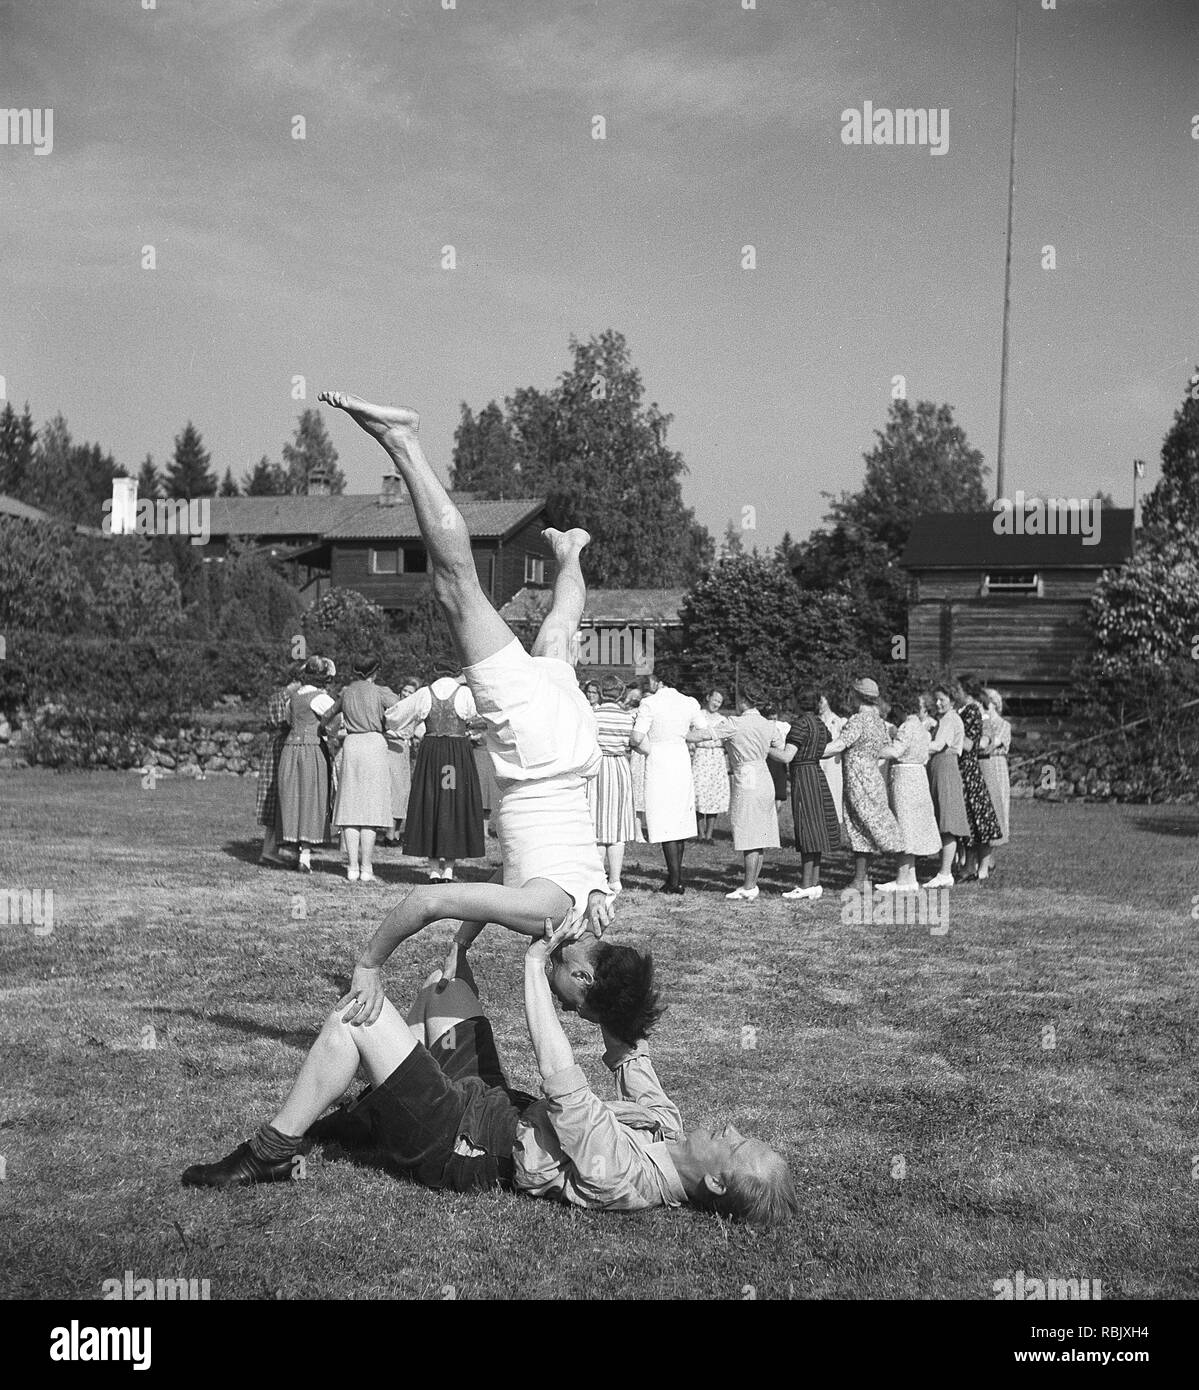 Summer dance in the 1940s. A group of women are practising their ring dance at an outdoor dance event in the summer. Two men in the forground does not appear interested in participating in that, and do their own balance act, unknown why. Photo Kristoffersson Ref 219-23. Sweden 1941 Stock Photo